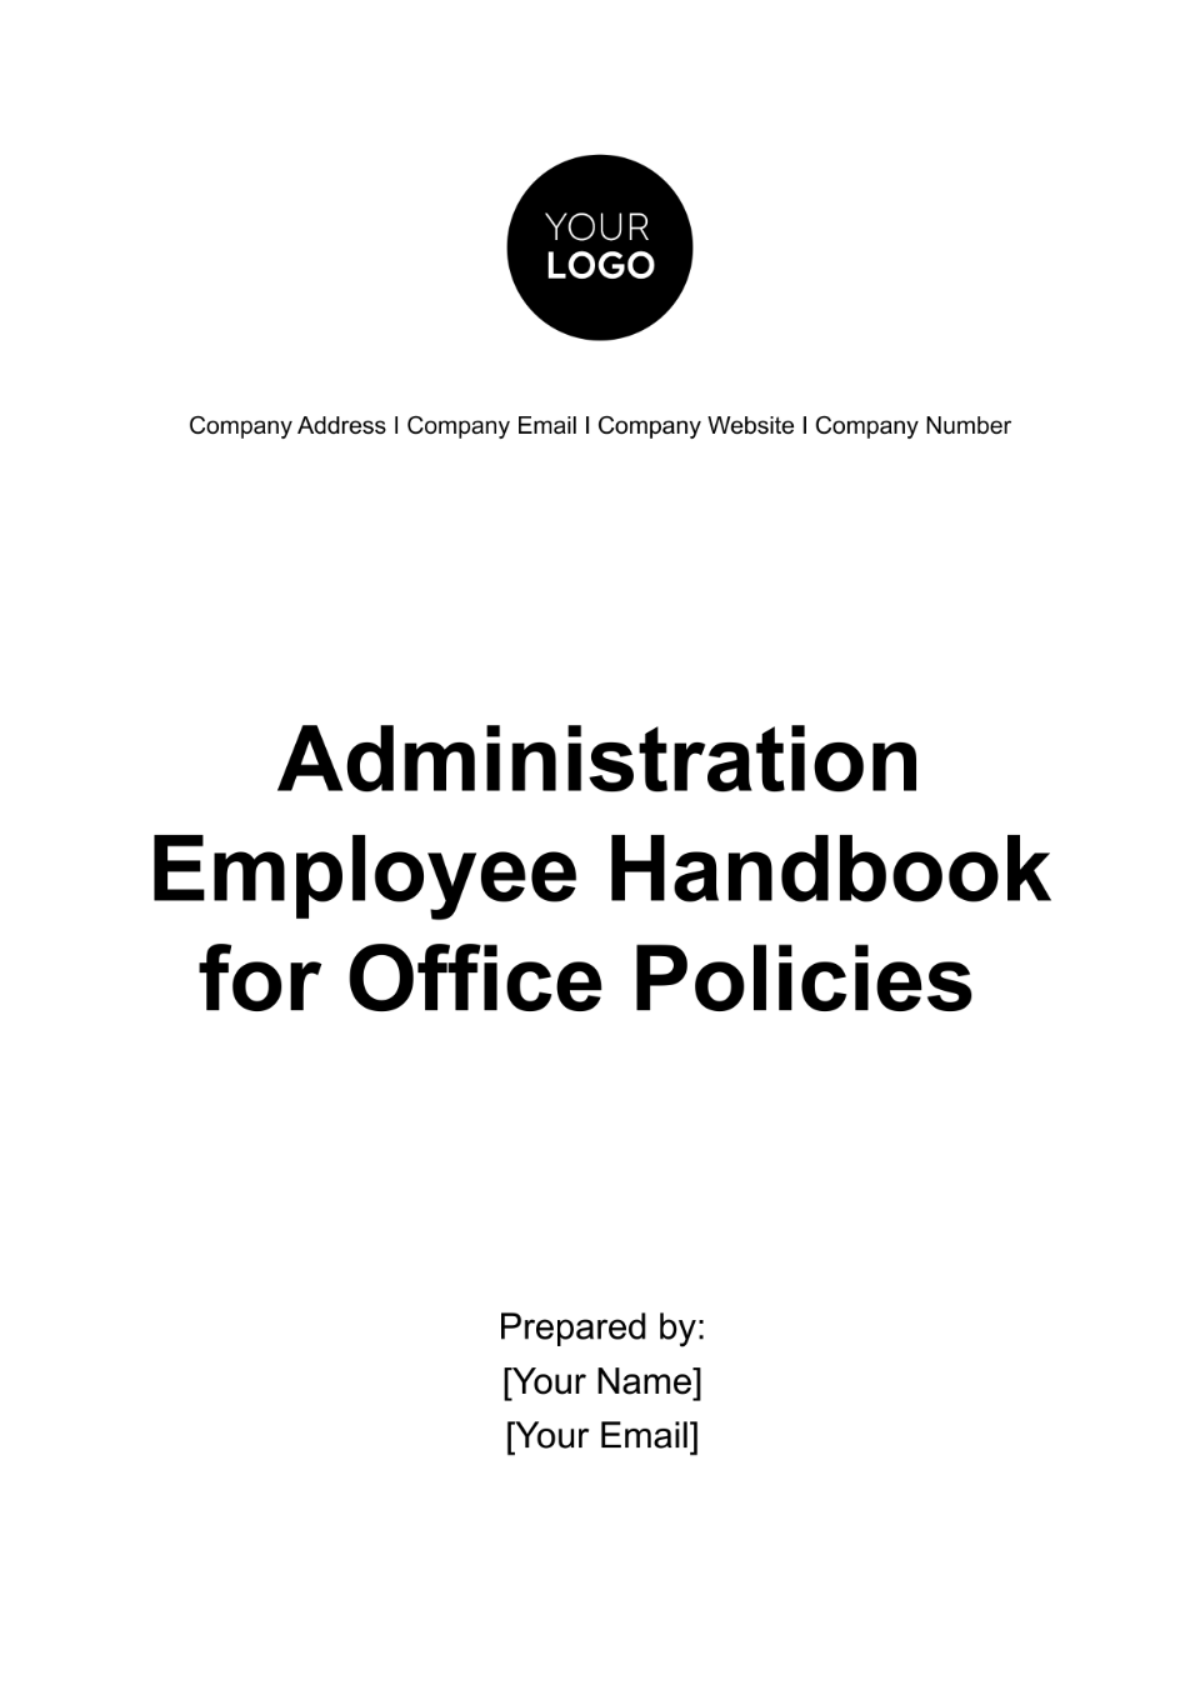 Administration Employee Handbook for Office Policies Template